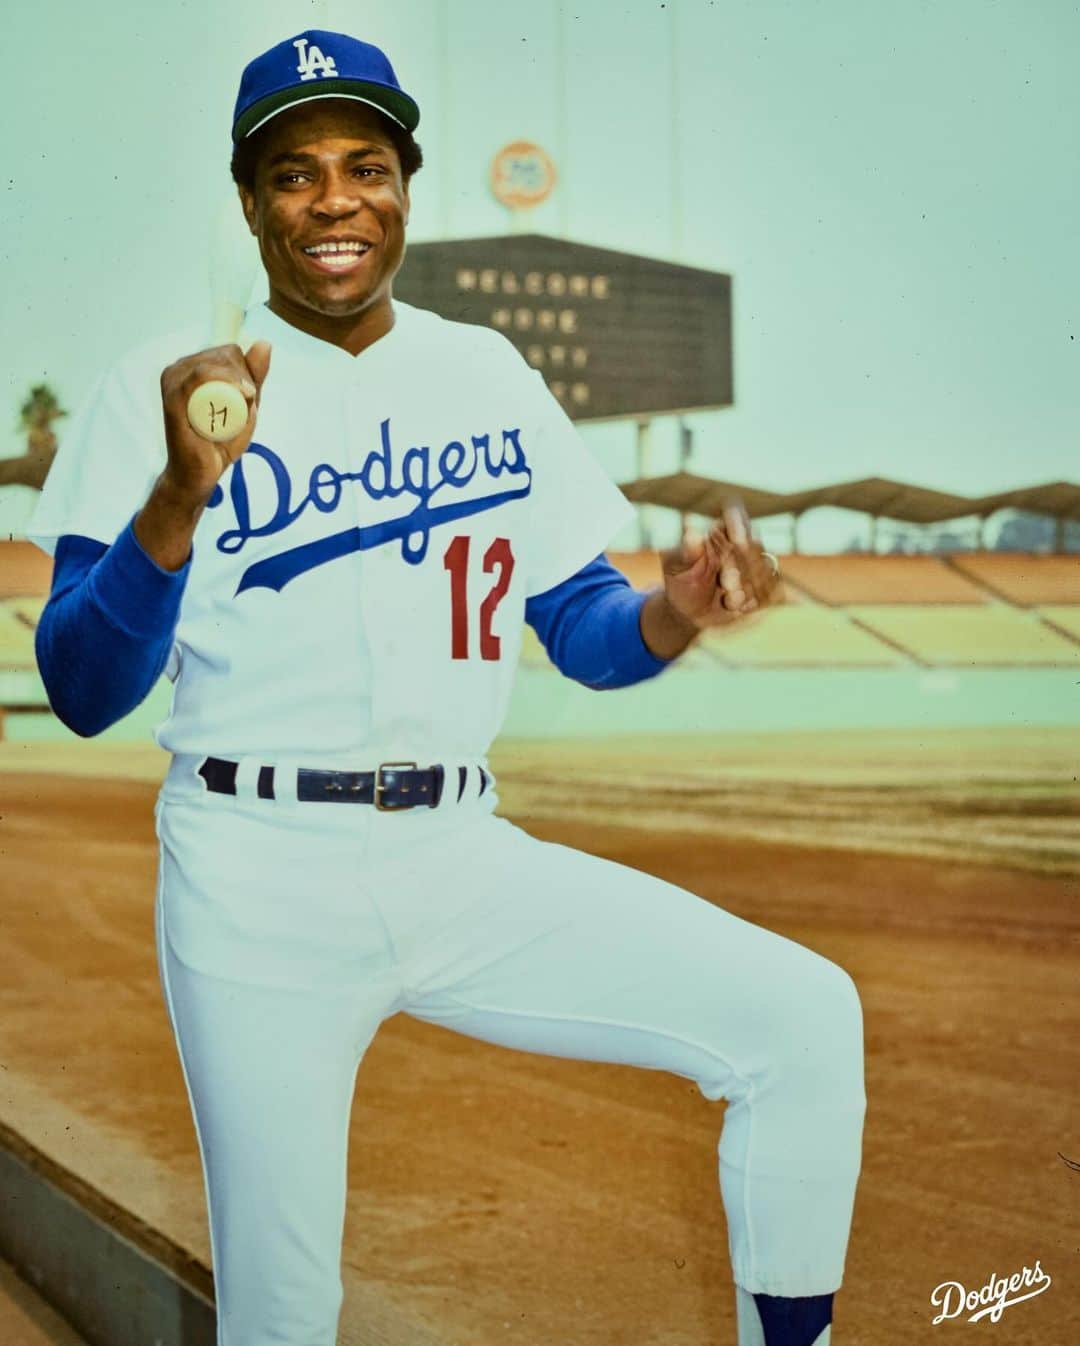 Los Angeles Dodgersのインスタグラム：「Congratulations Dusty on a storied career, both as a player and manager! Thank you for your contributions in Dodger blue. We wish you the best in retirement. And for one last time … high five, Dusty!」